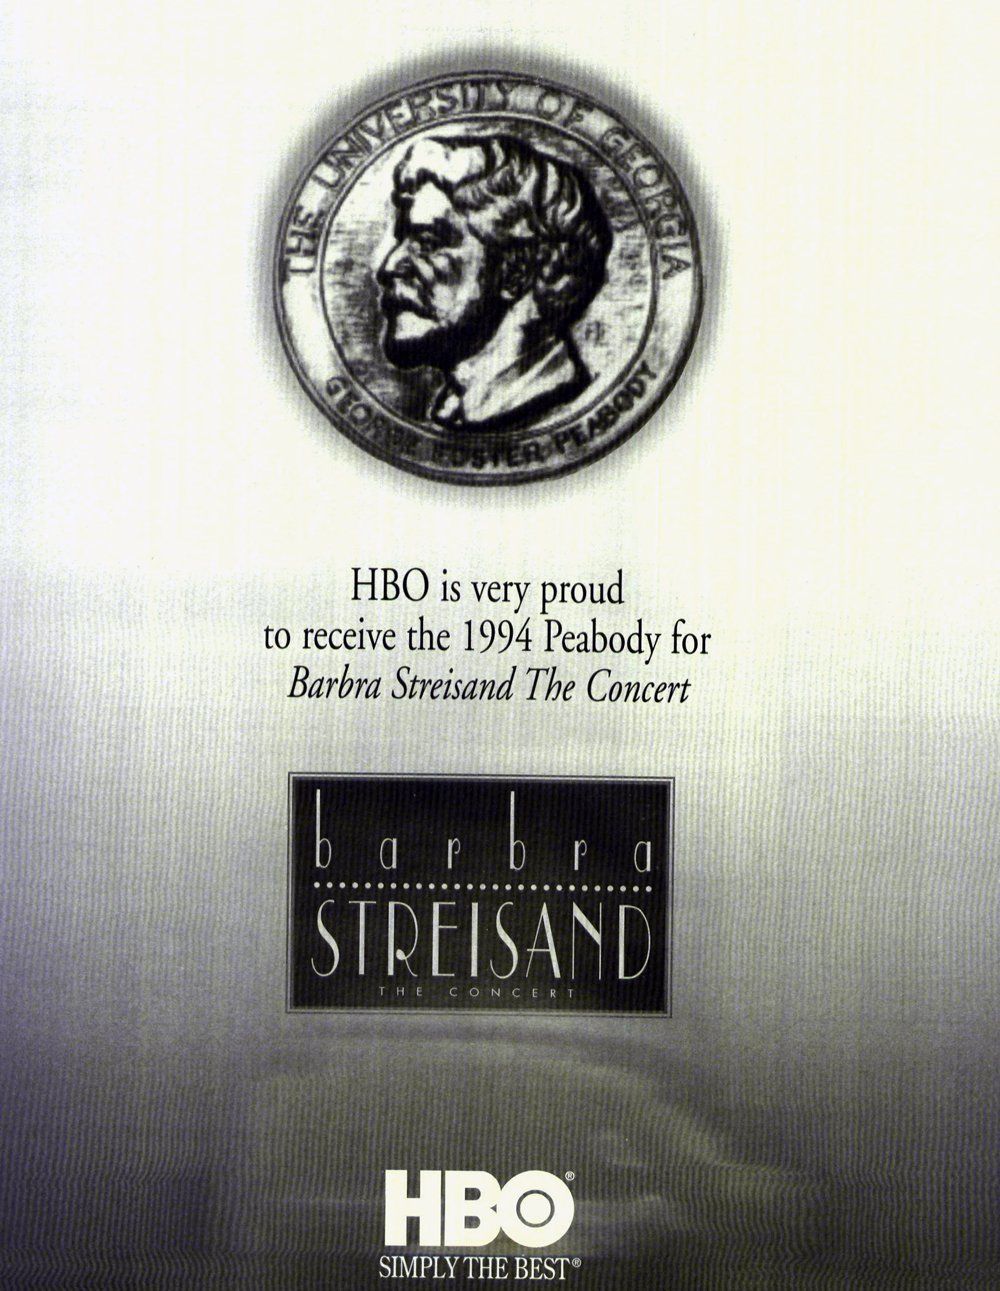 HBO congratulations ad for the 1994 Peabody Award.